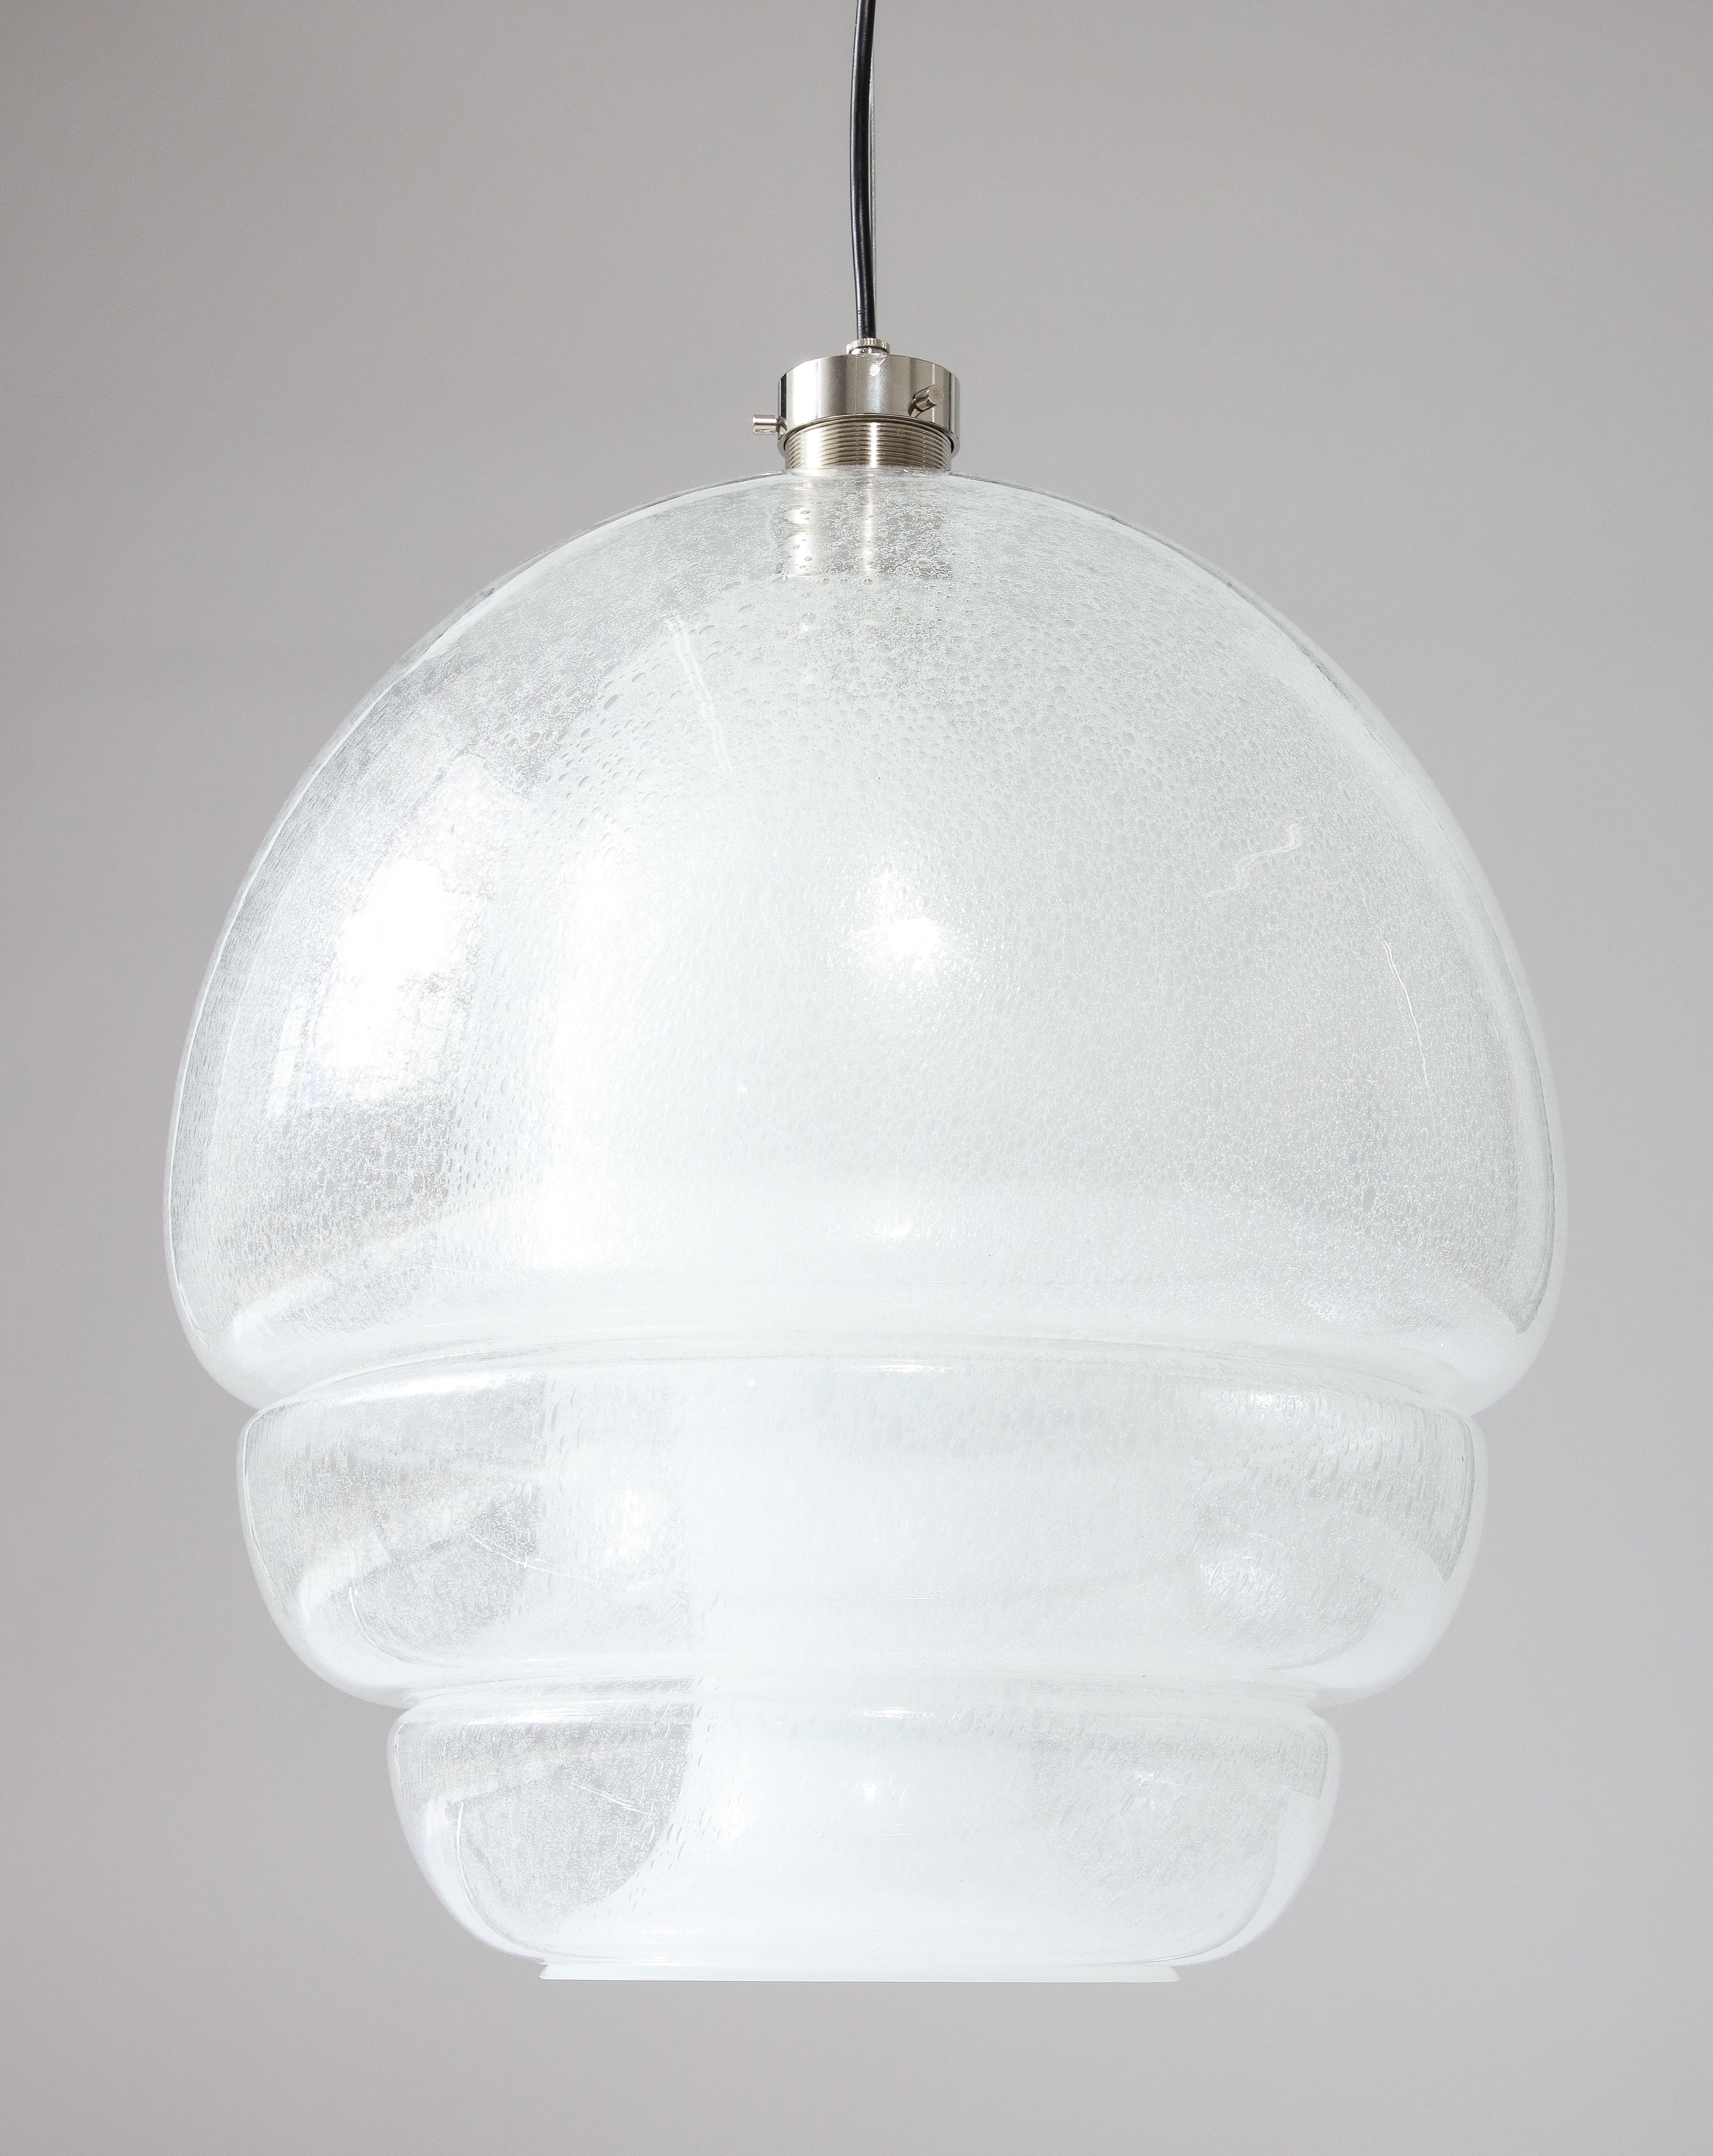 LS 134 Medusa Ceiling Lamp/Pendant by Carlo Nason, Italy, c. 1960 For Sale 6